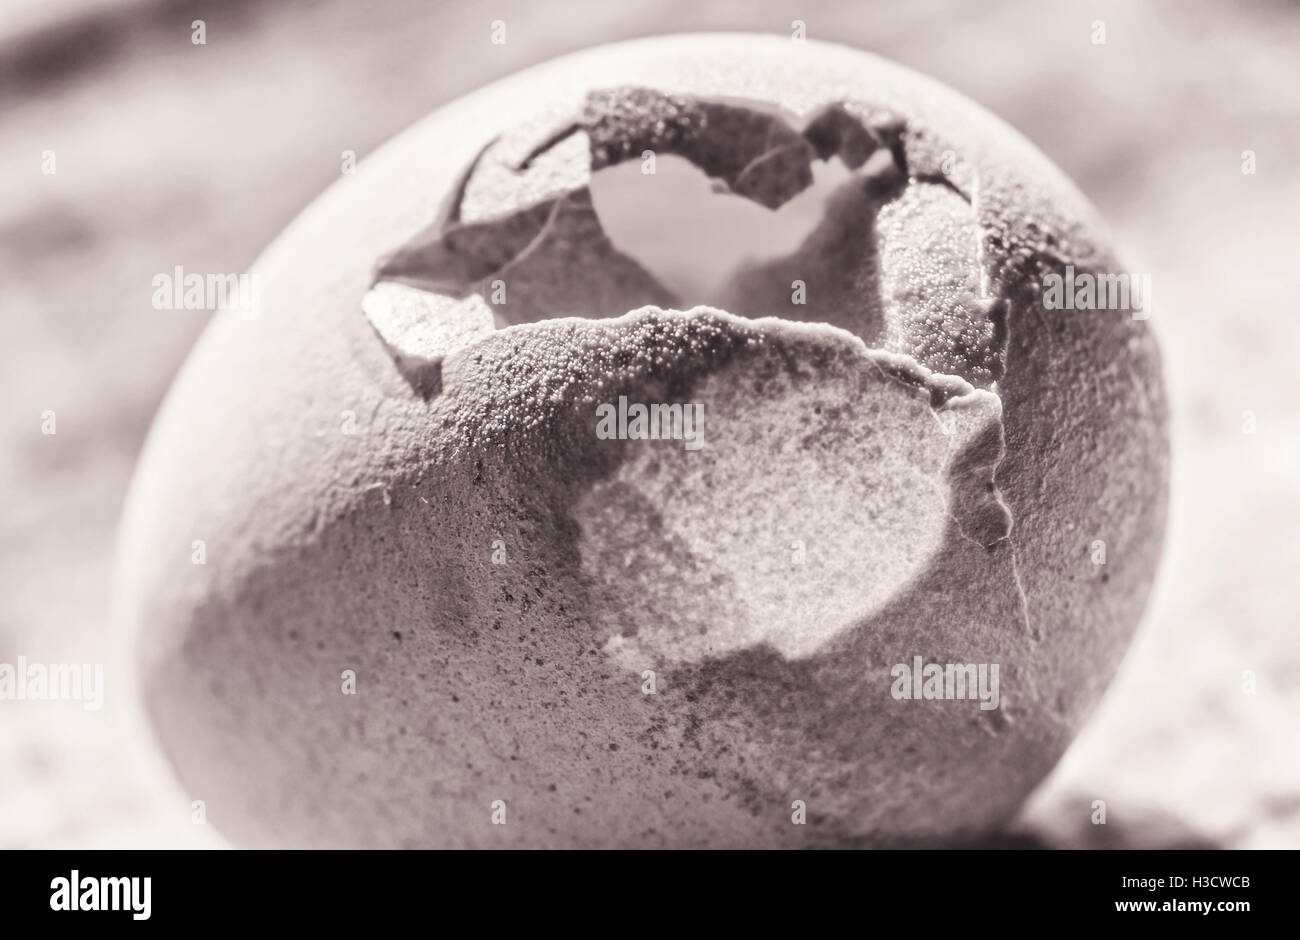 Cracked big chicken egg close-up in sepia Stock Photo